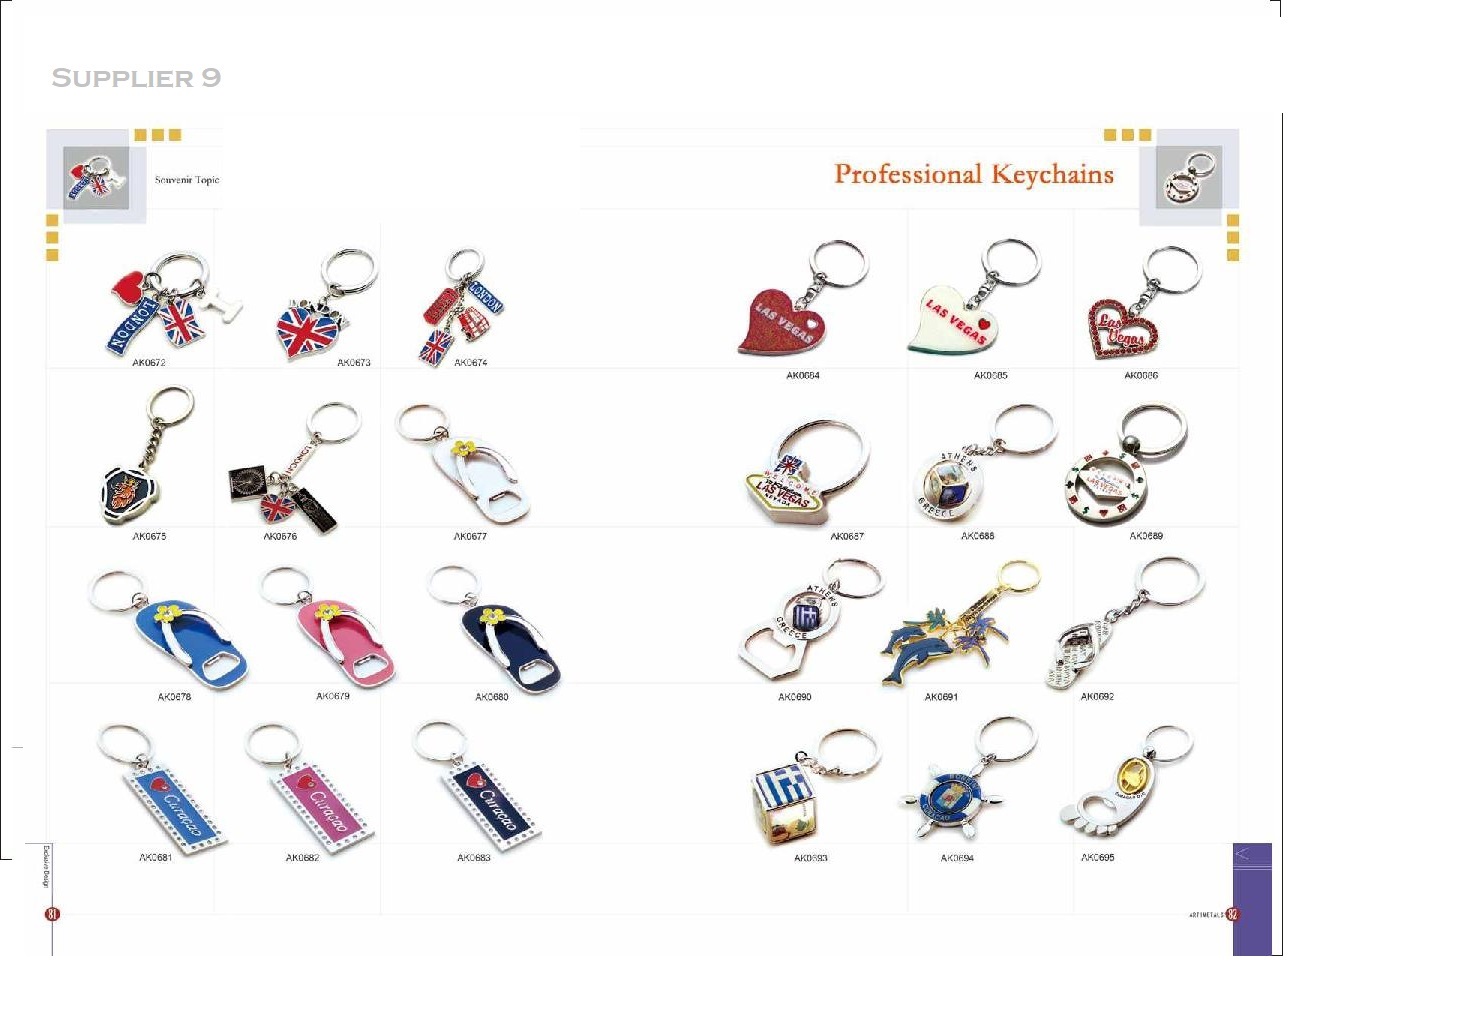 Custom Metal Keychains Promotional Product Direct. America's B2b business marketing experts. Factory direct business swag and promotional marketing products.